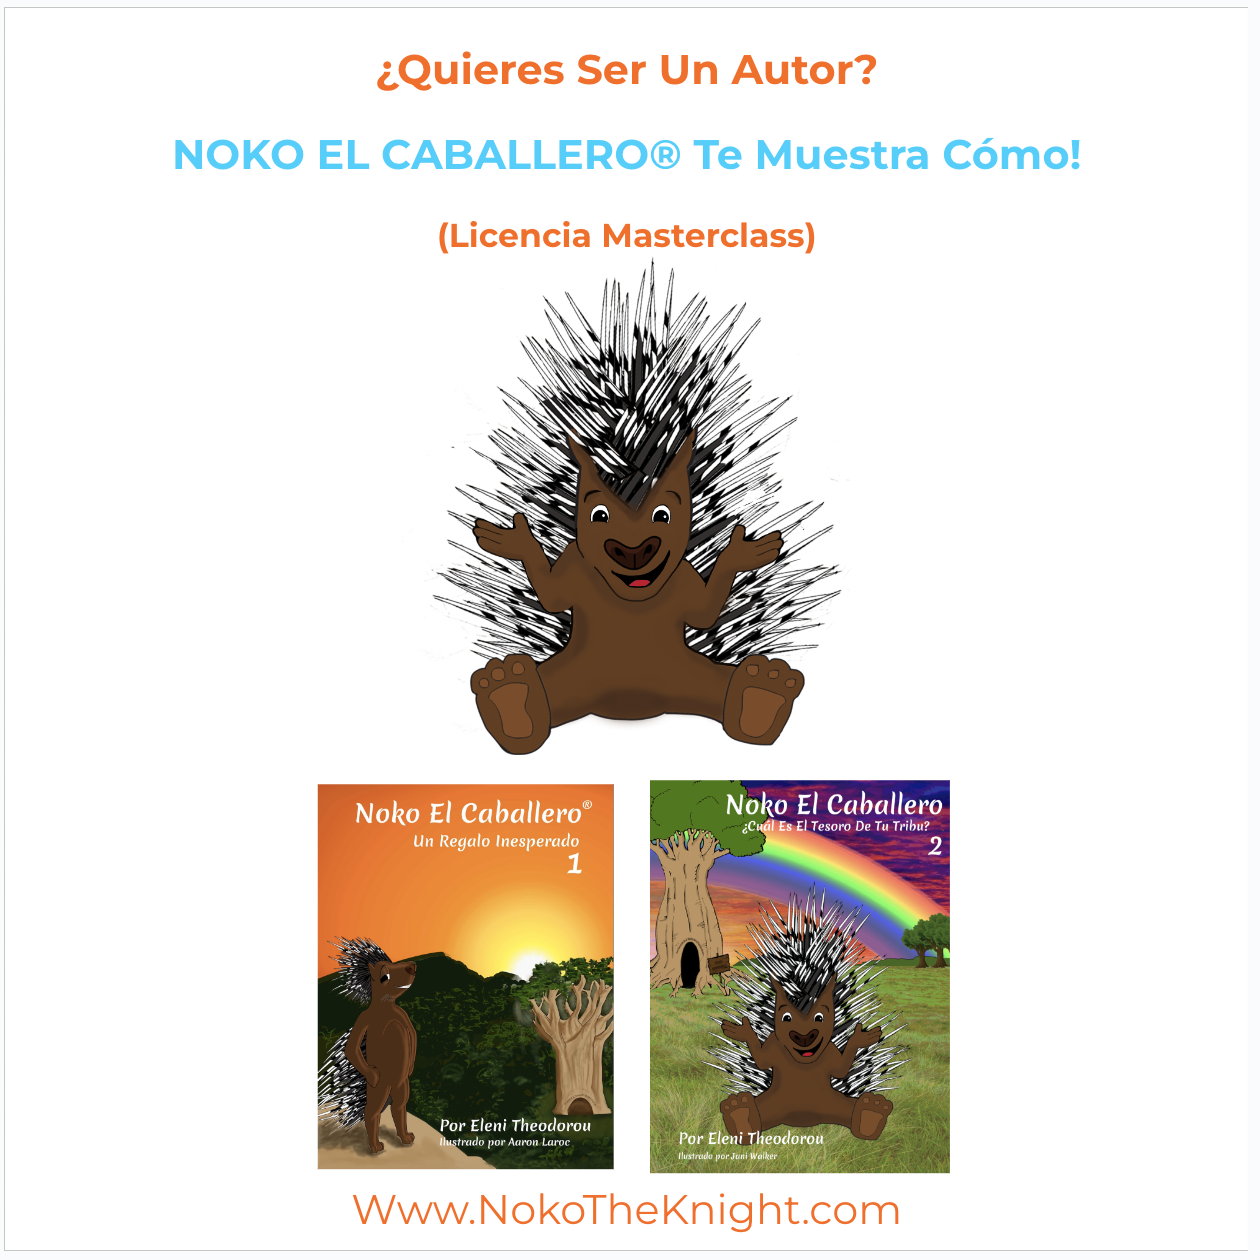 Want to be an author? SPANISH www.nokotheknight.com